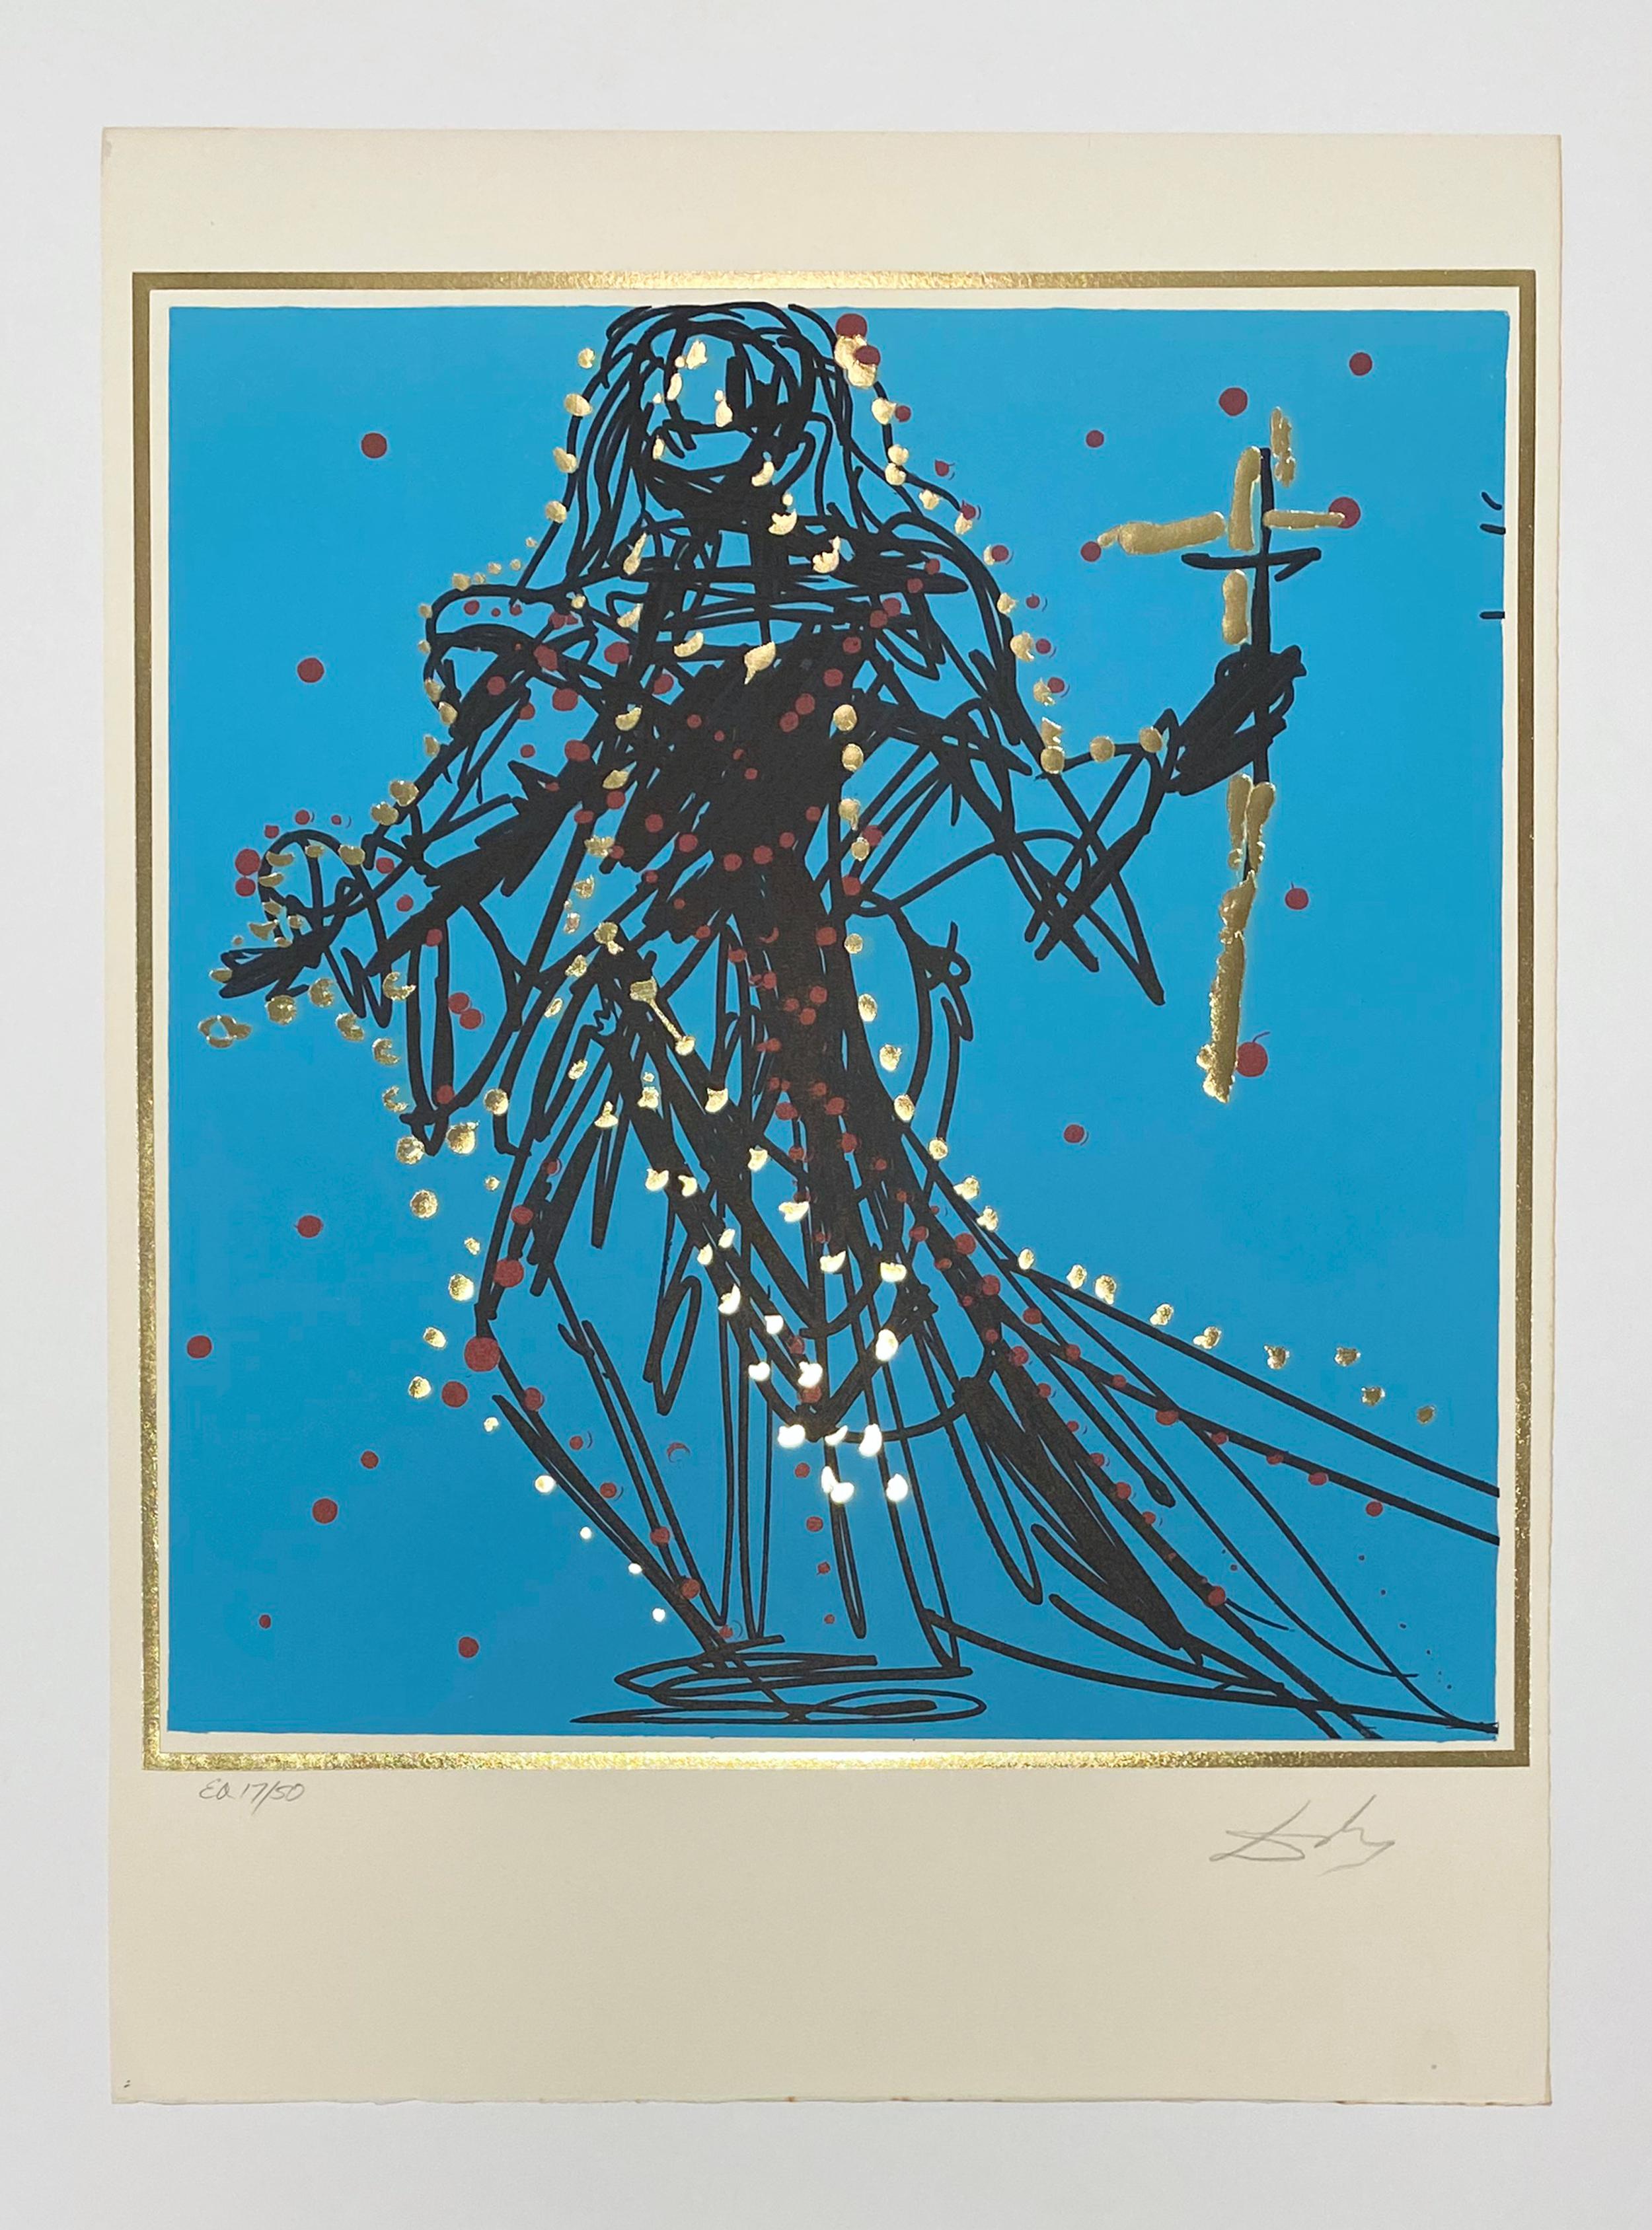 Artist: Salvador Dali
Title: Jude (Excalibur)
Portfolio: The Twelve Apostles (Knights of the Round Table)
Medium: Lithograph
Year: 1972
Edition: EA 17/50 (aside from edition of 350)
Frame Size: 29 7/8